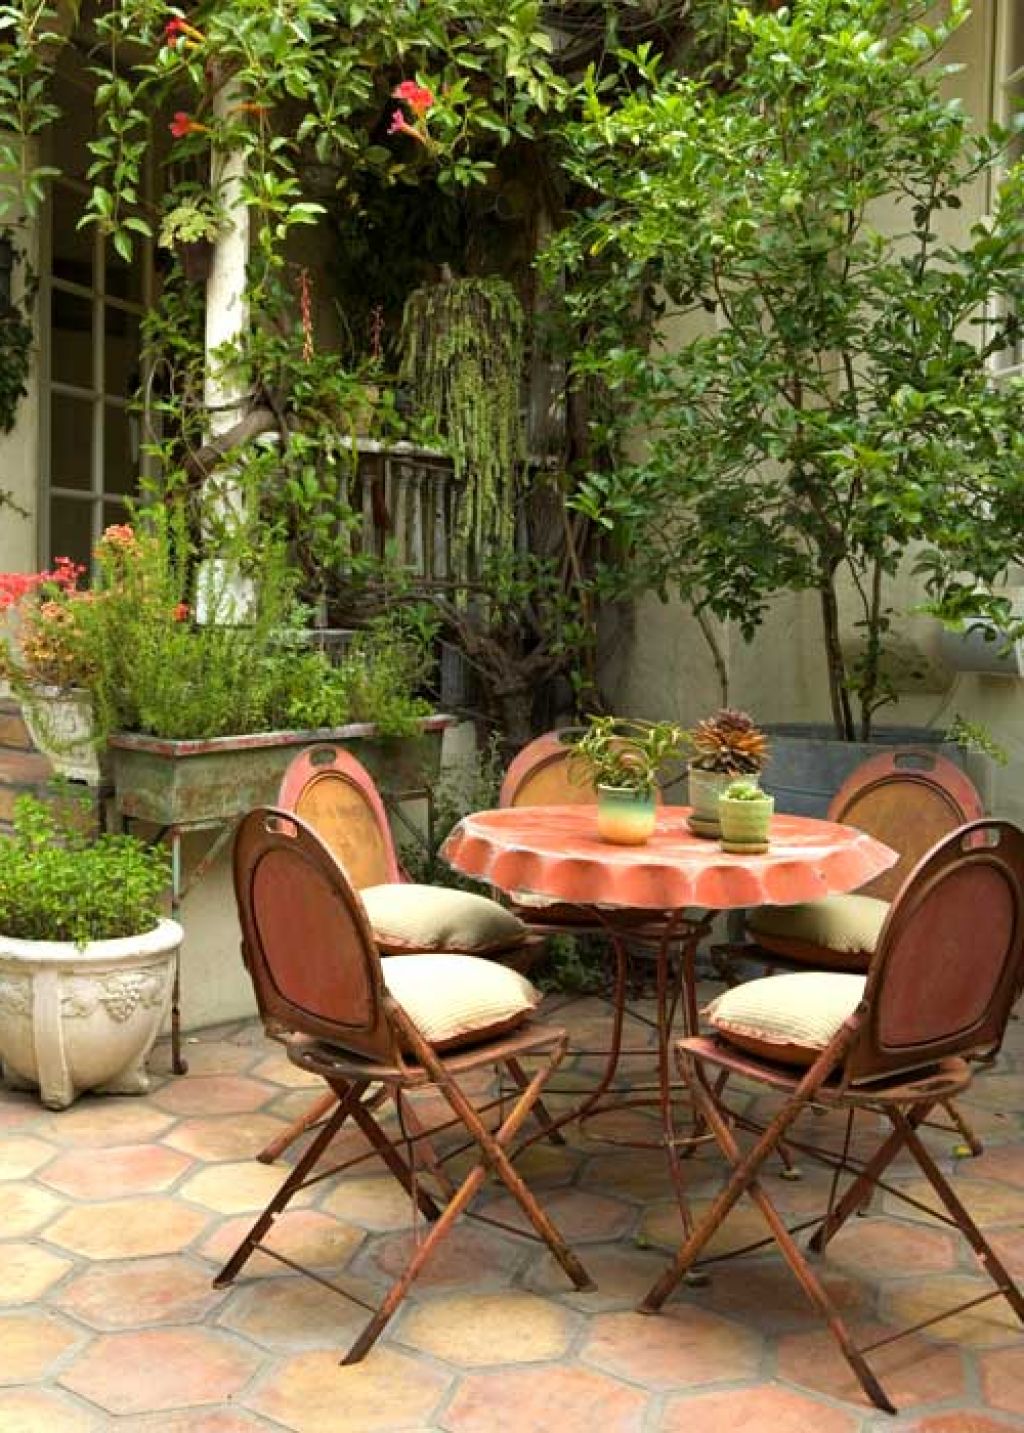 Beautiful-patio-dining-area-with-rustic-metal-chairs-and-small-round-table-best-for-small-spaces.